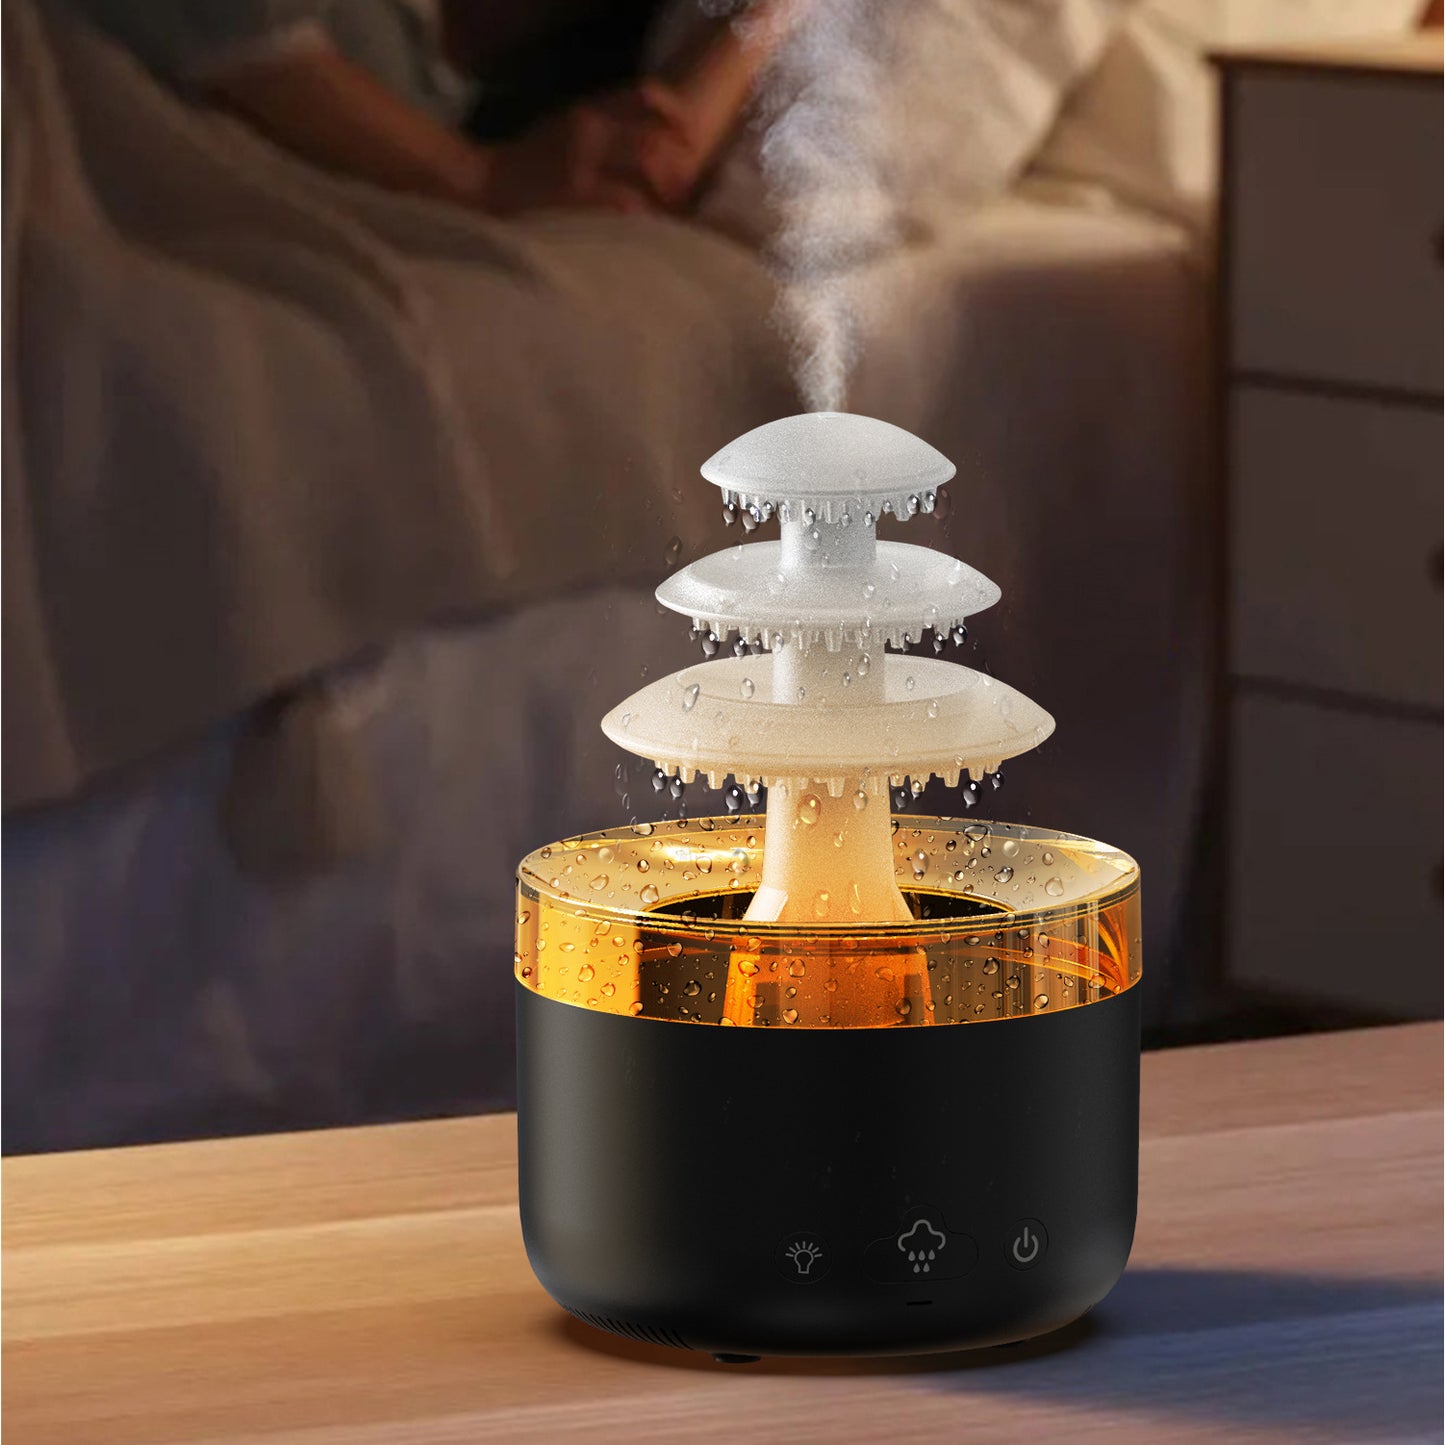 Mute Mist Air Humidifier With Colorful Light